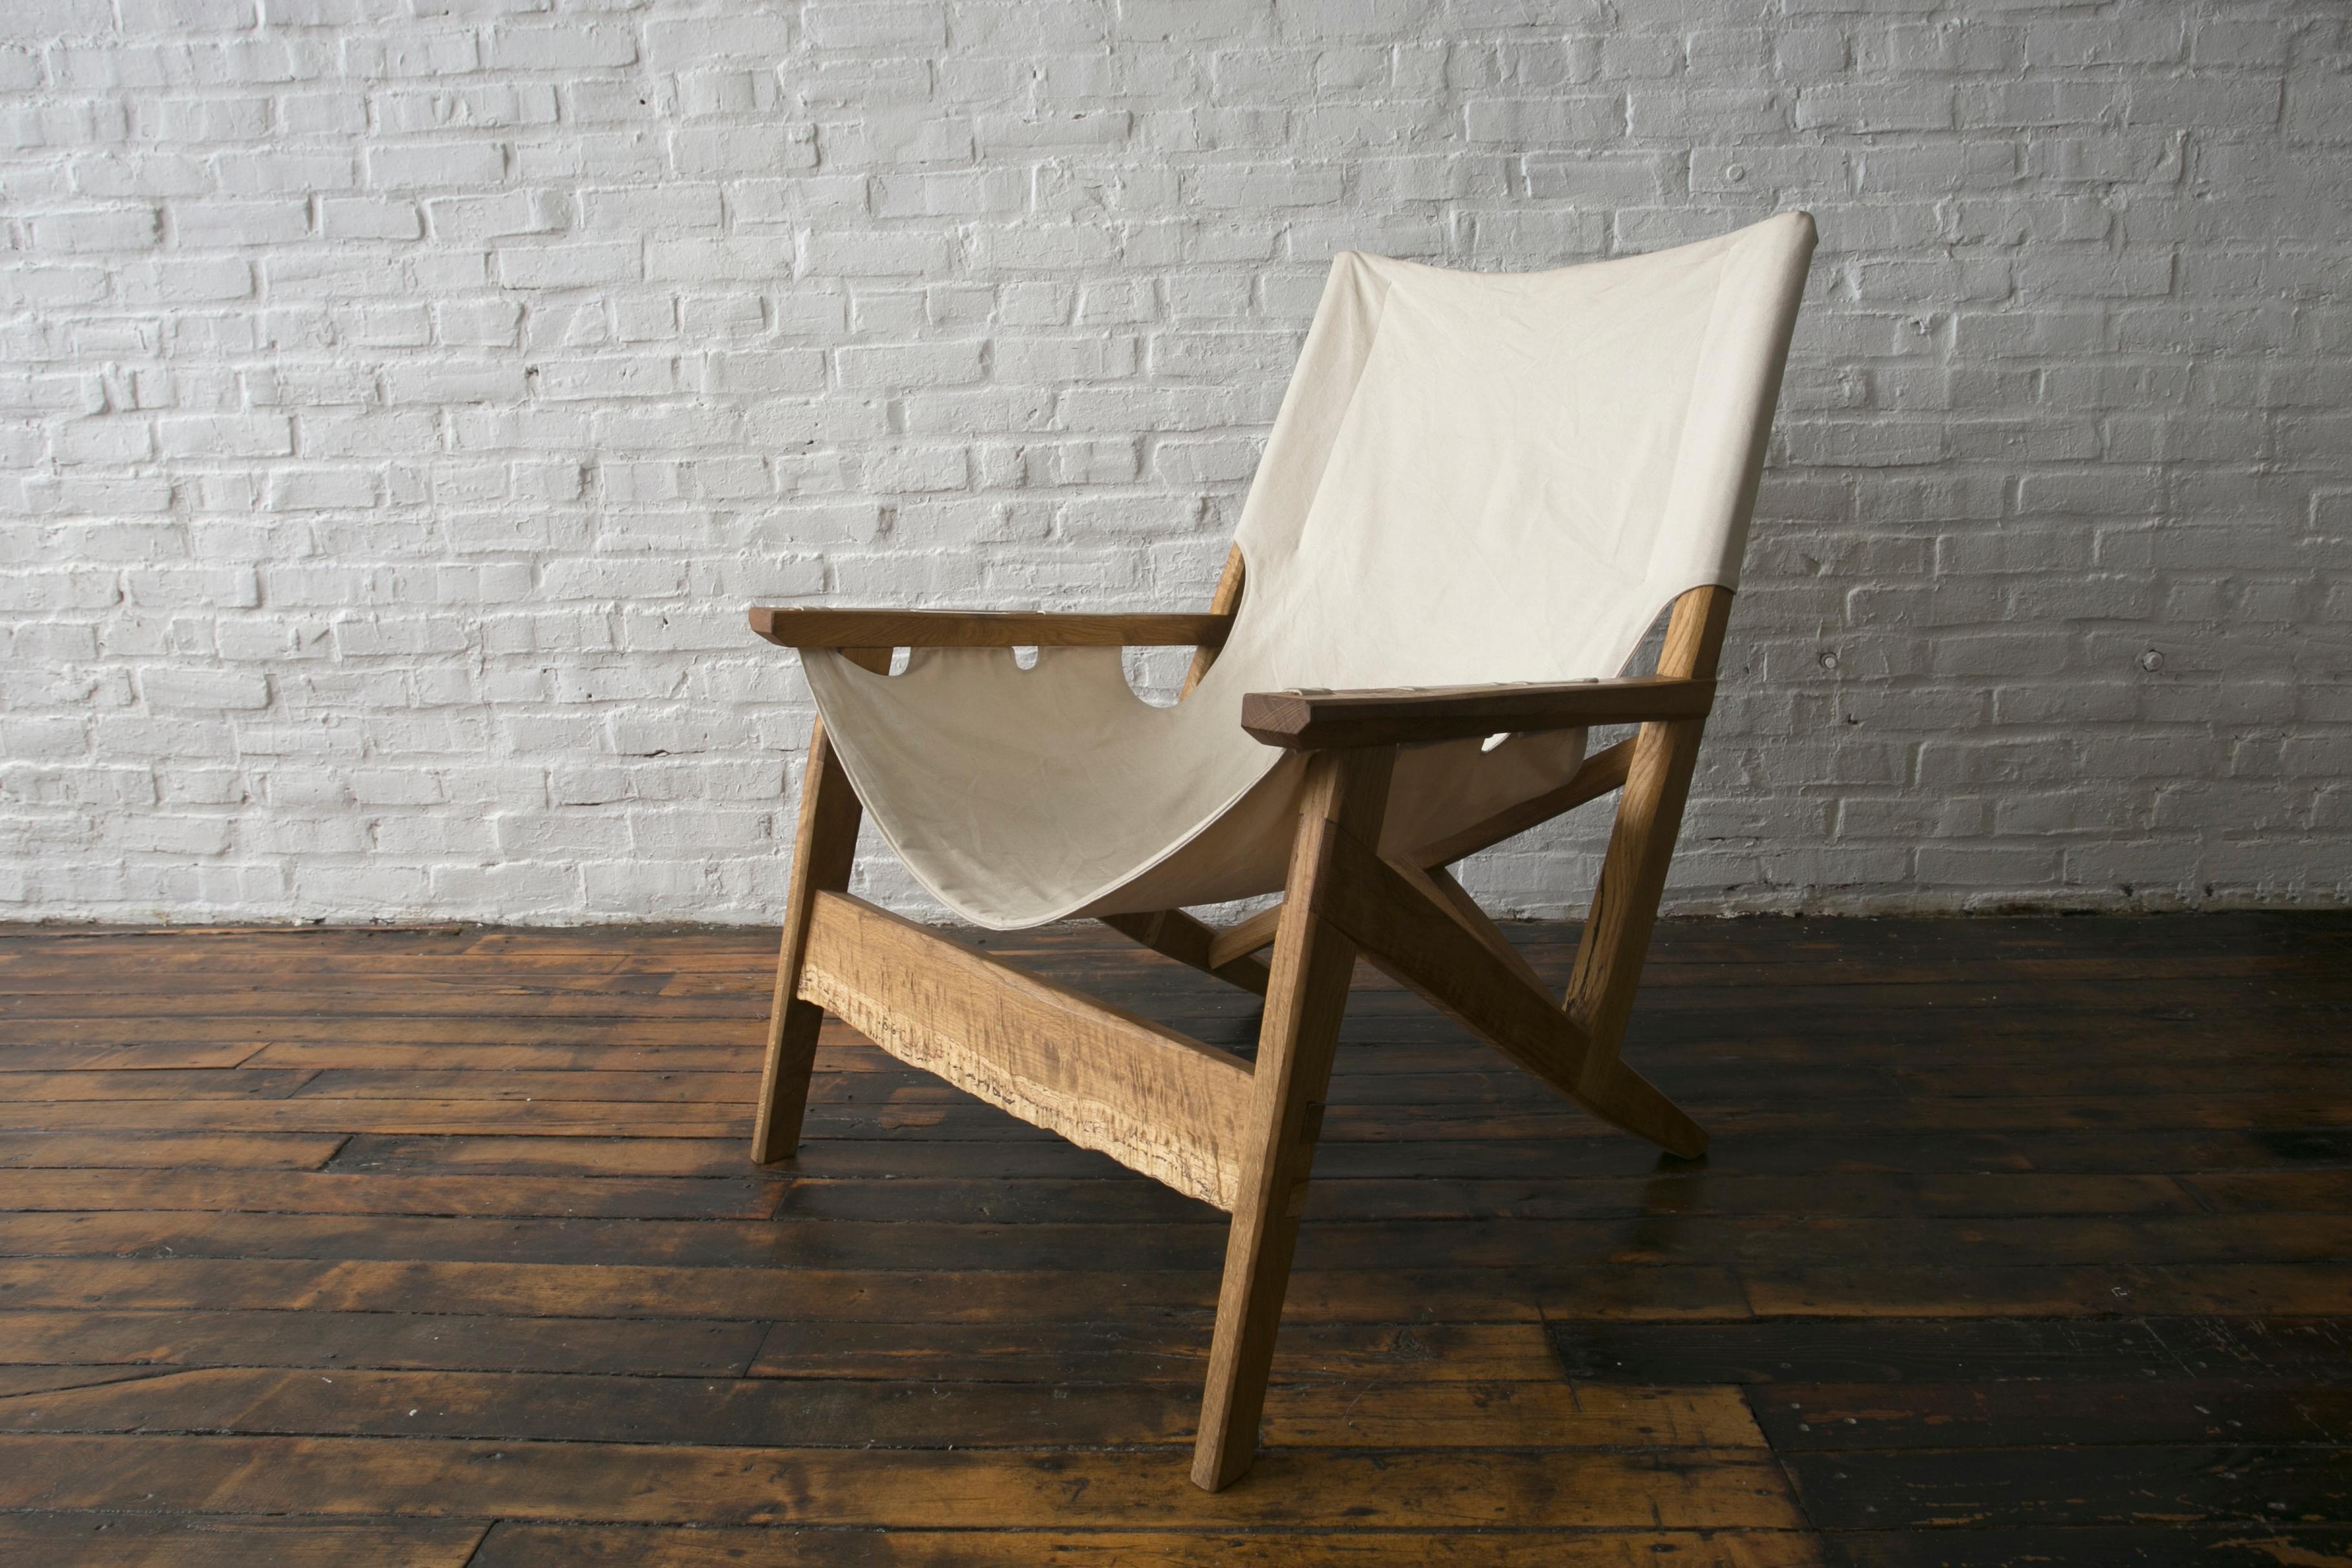 Our original sling chair design is made with the goal to have a sustainable chair that blends comfort and beauty. The frame is inspired by danish design and hand crafted in a way that allows it to be taken apart, and put back together when needed.